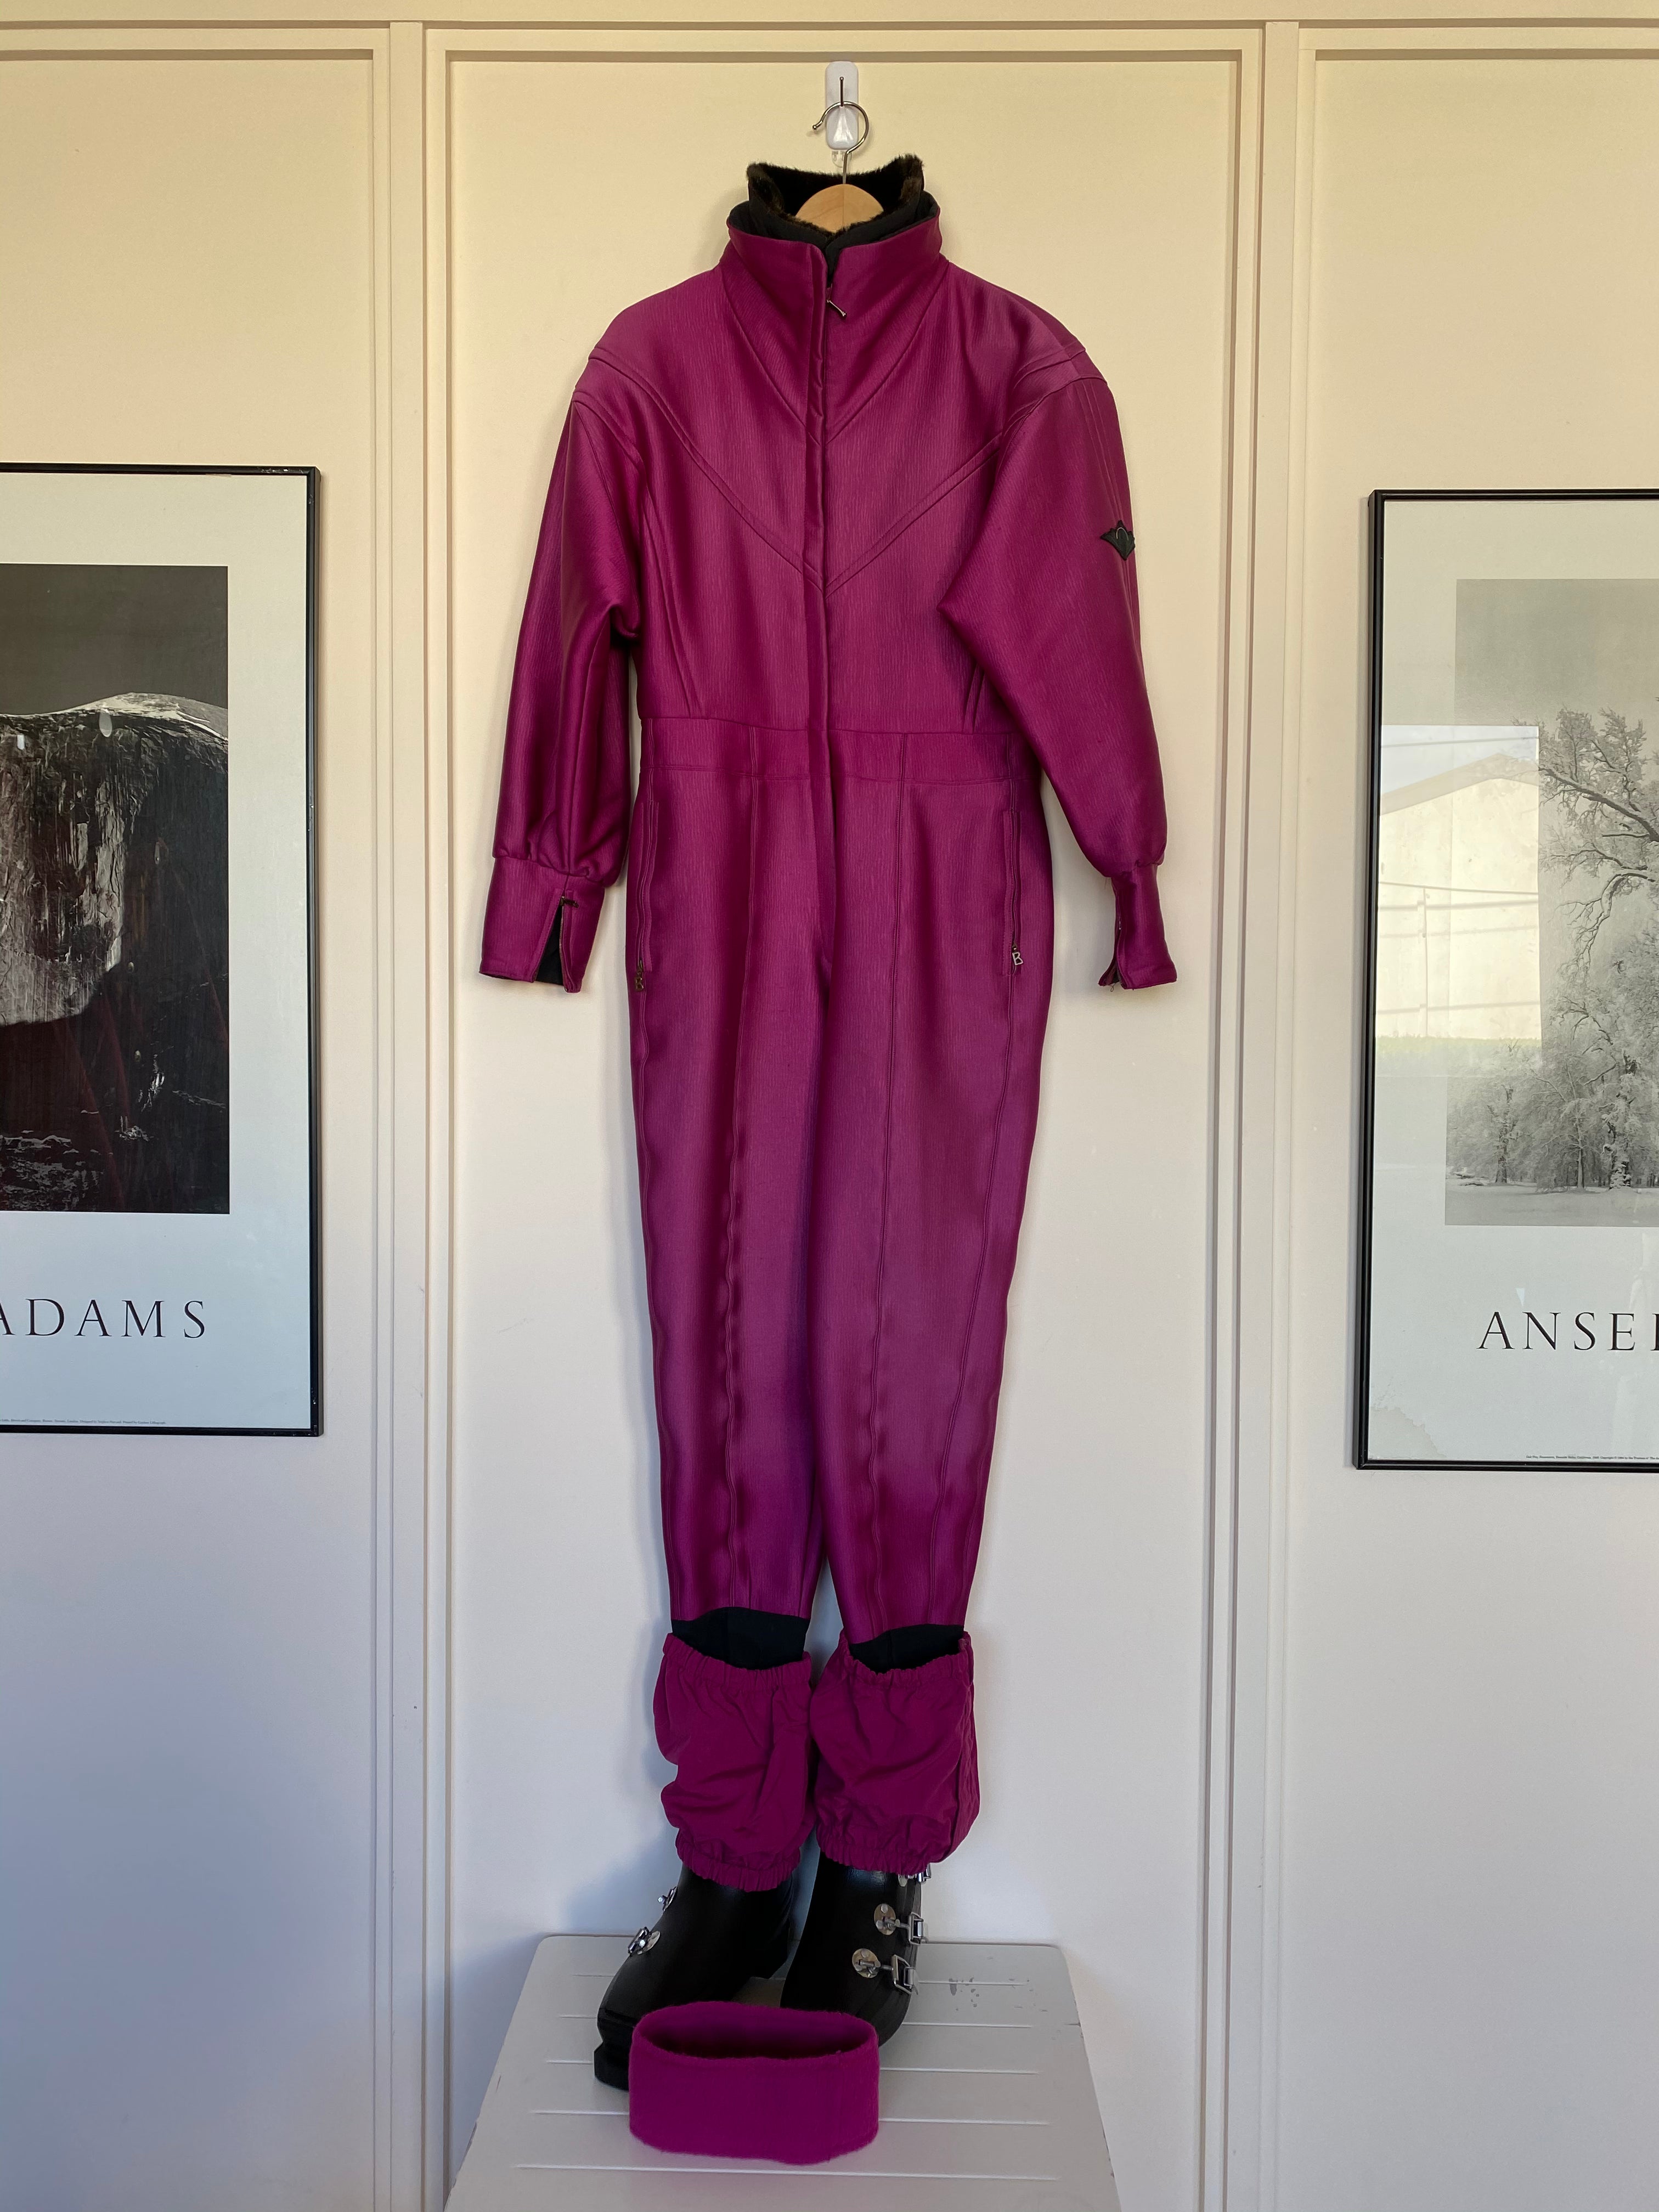 Vintage Bogner Iridescent Fuchsia Tailored One Piece Ski Suit, front view, with matching gaiters and headband